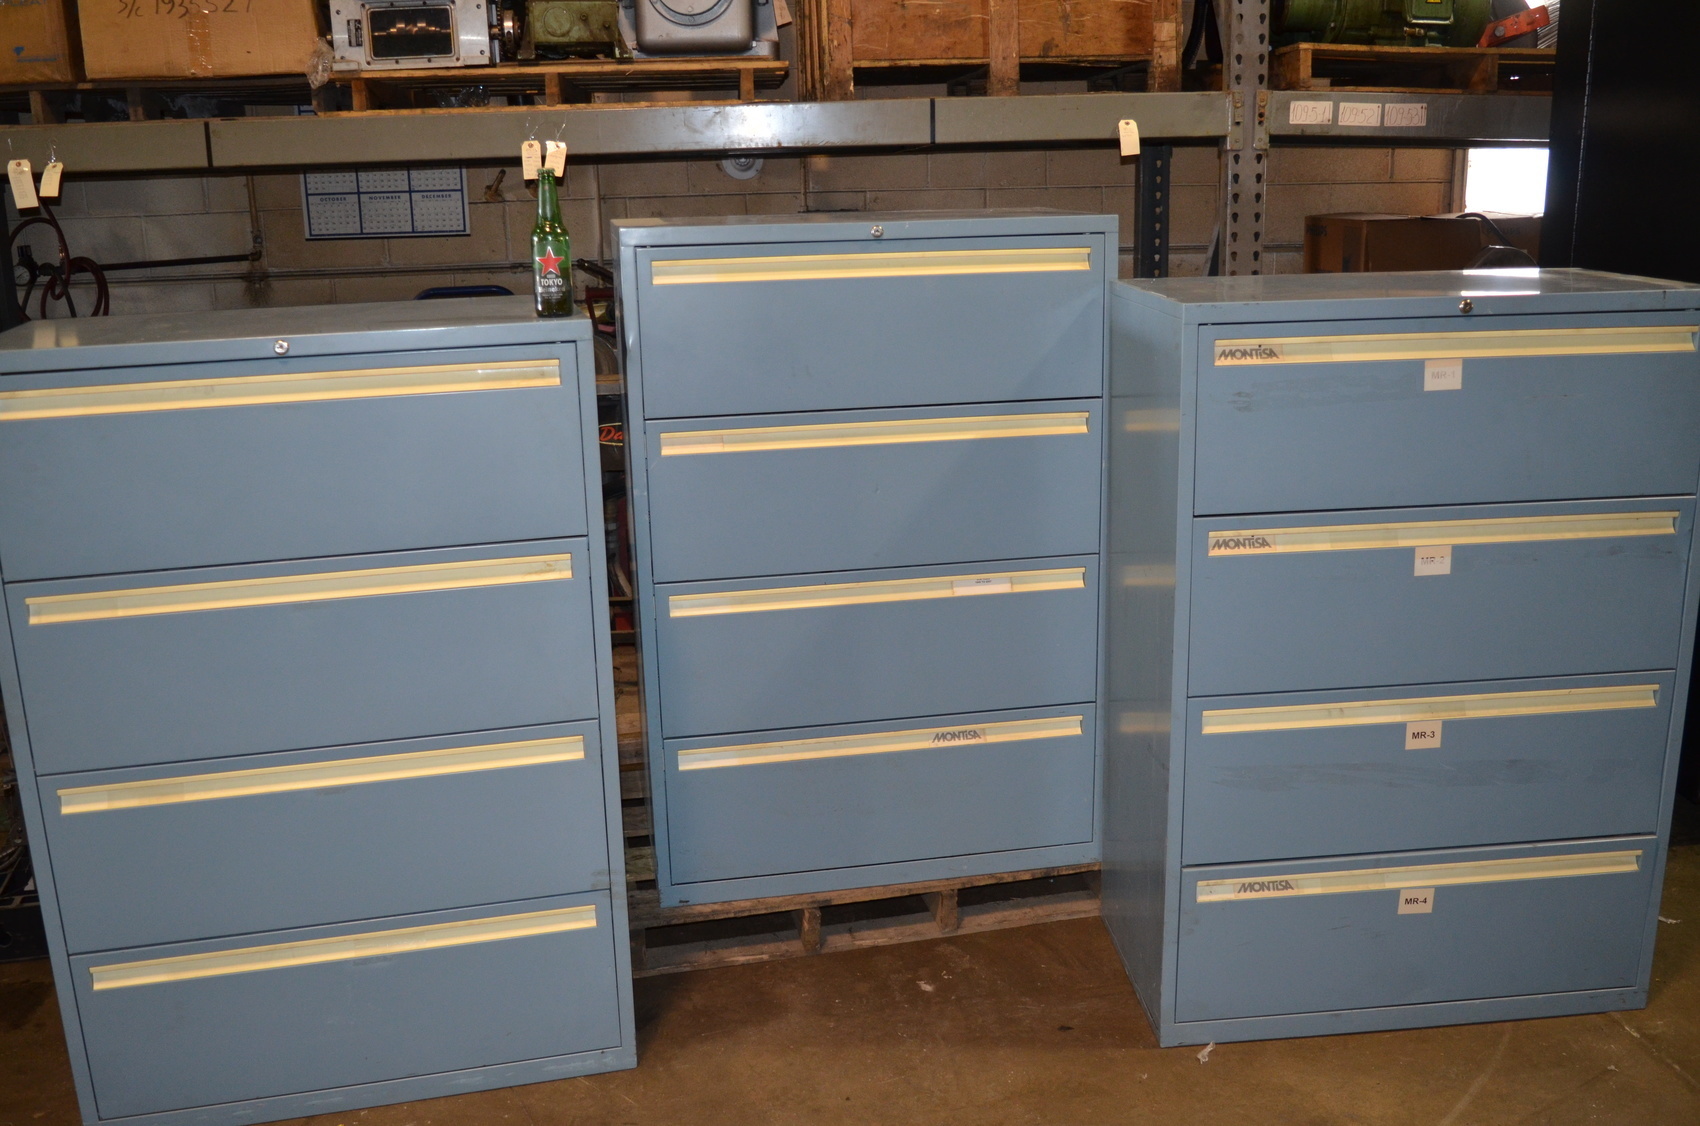 Lot of 3 file cabinets;overall 36 x 19 x 51";drawers-31x15x9-1/2"